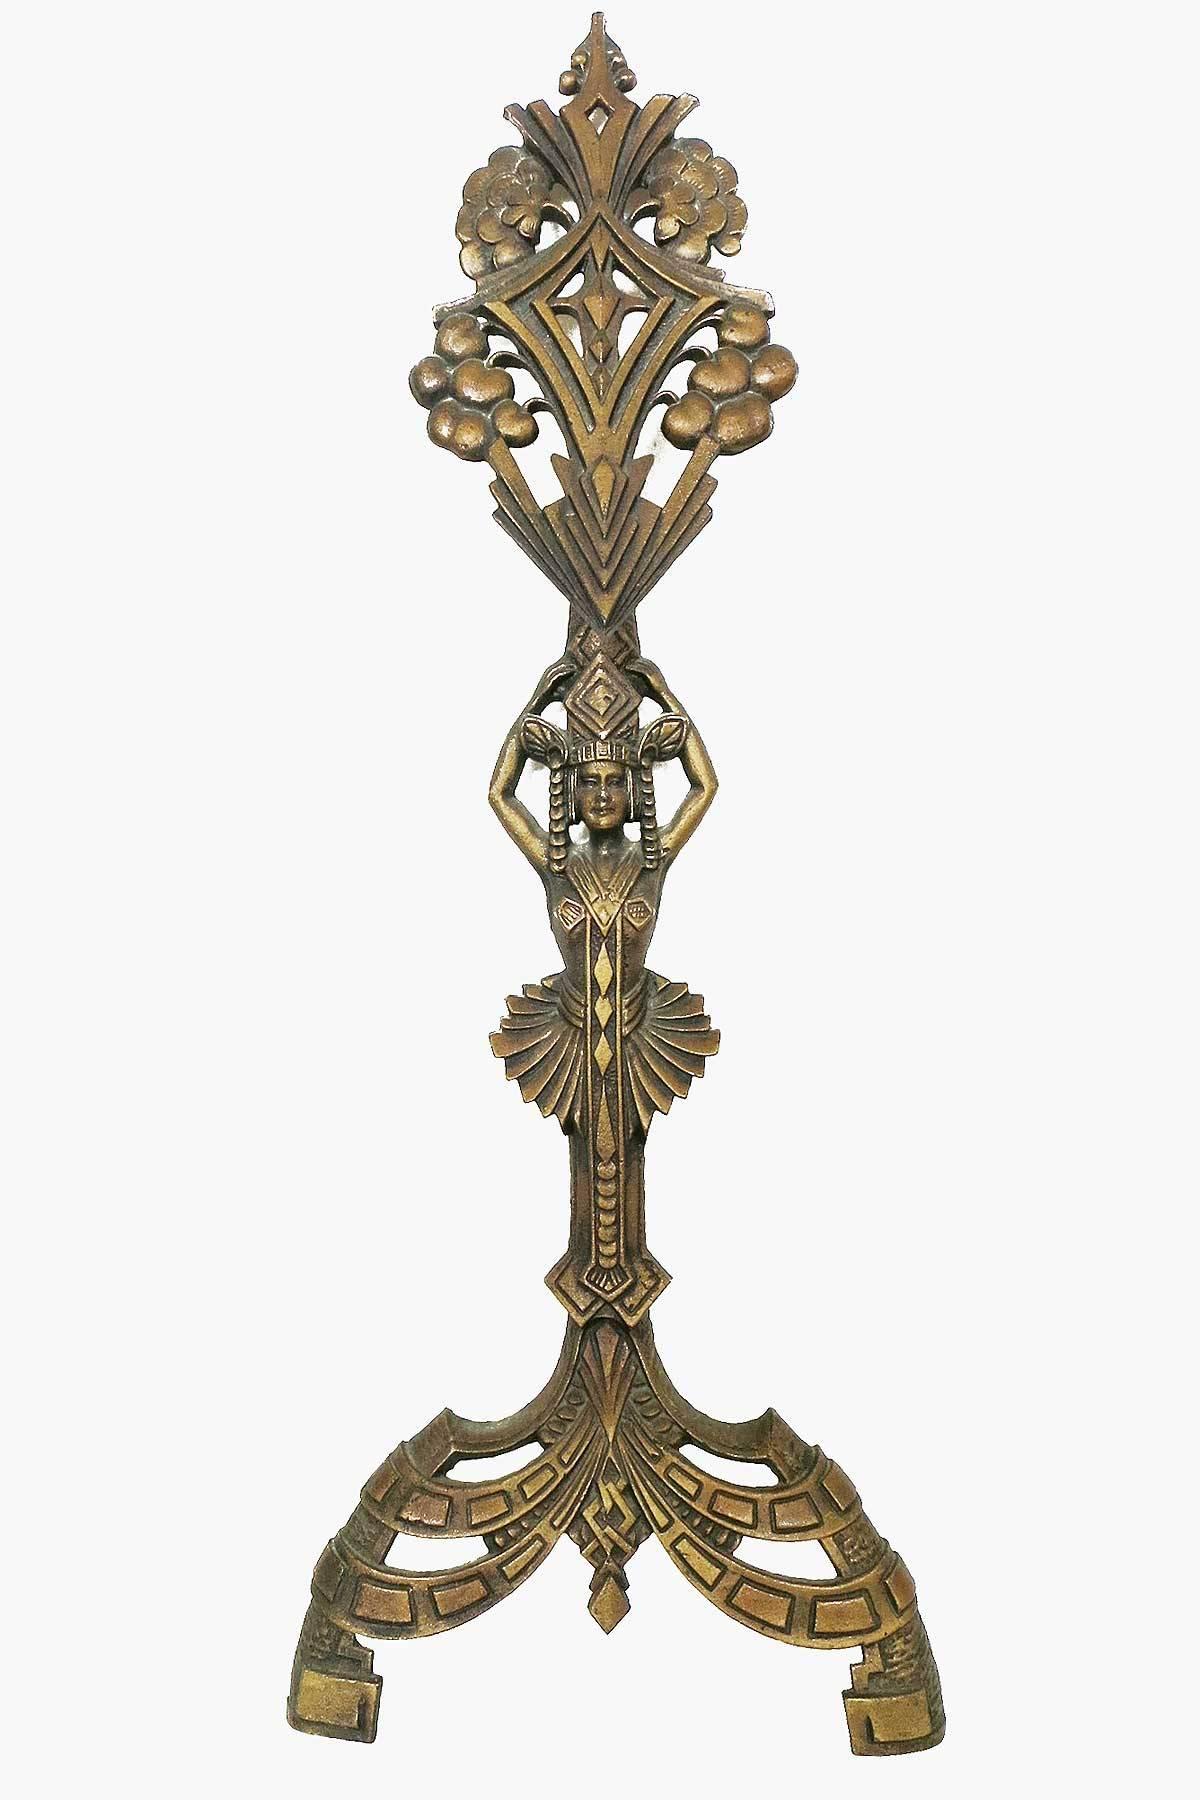 A unique pair of Egyptian Revival cast iron andirons. Each features a female figure, Egyptian motifs, and stylized geometric forms typical of the Art Deco period.
Stamped 